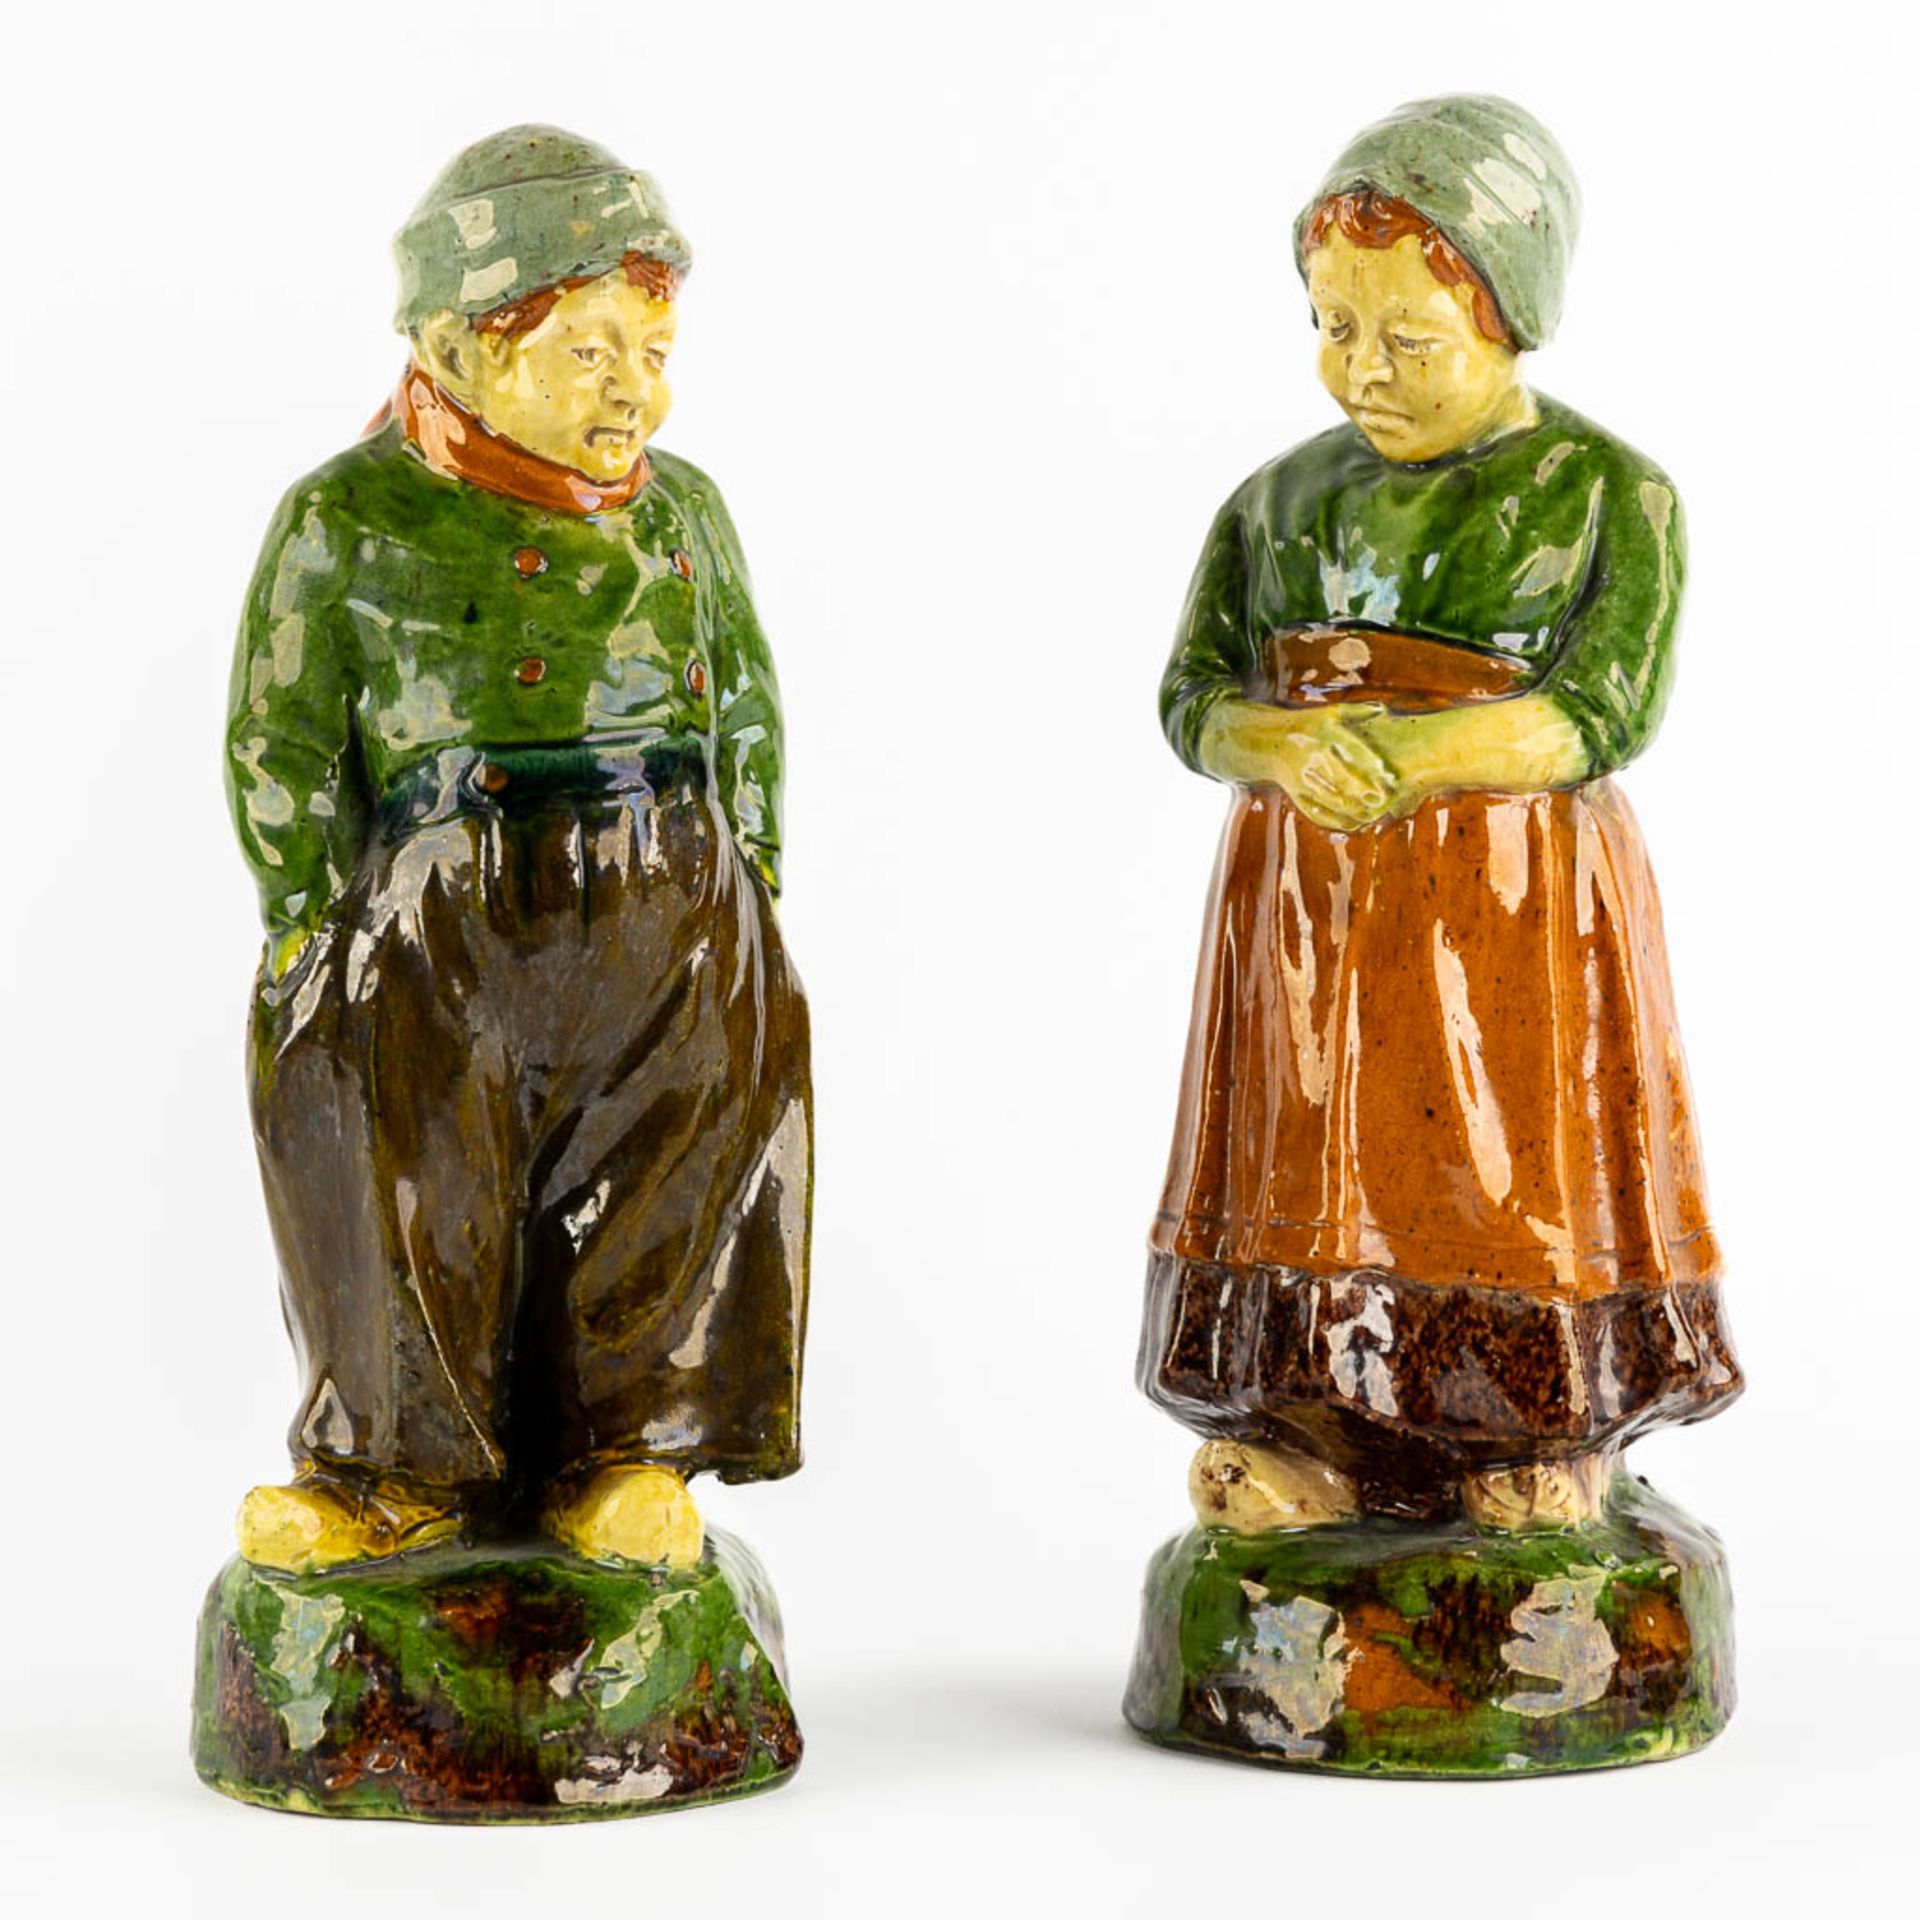 Figurine of a Man and Woman, Flemish Earthenware, possibly Caessens. Circa 1900. (H:32 x D:12 cm)